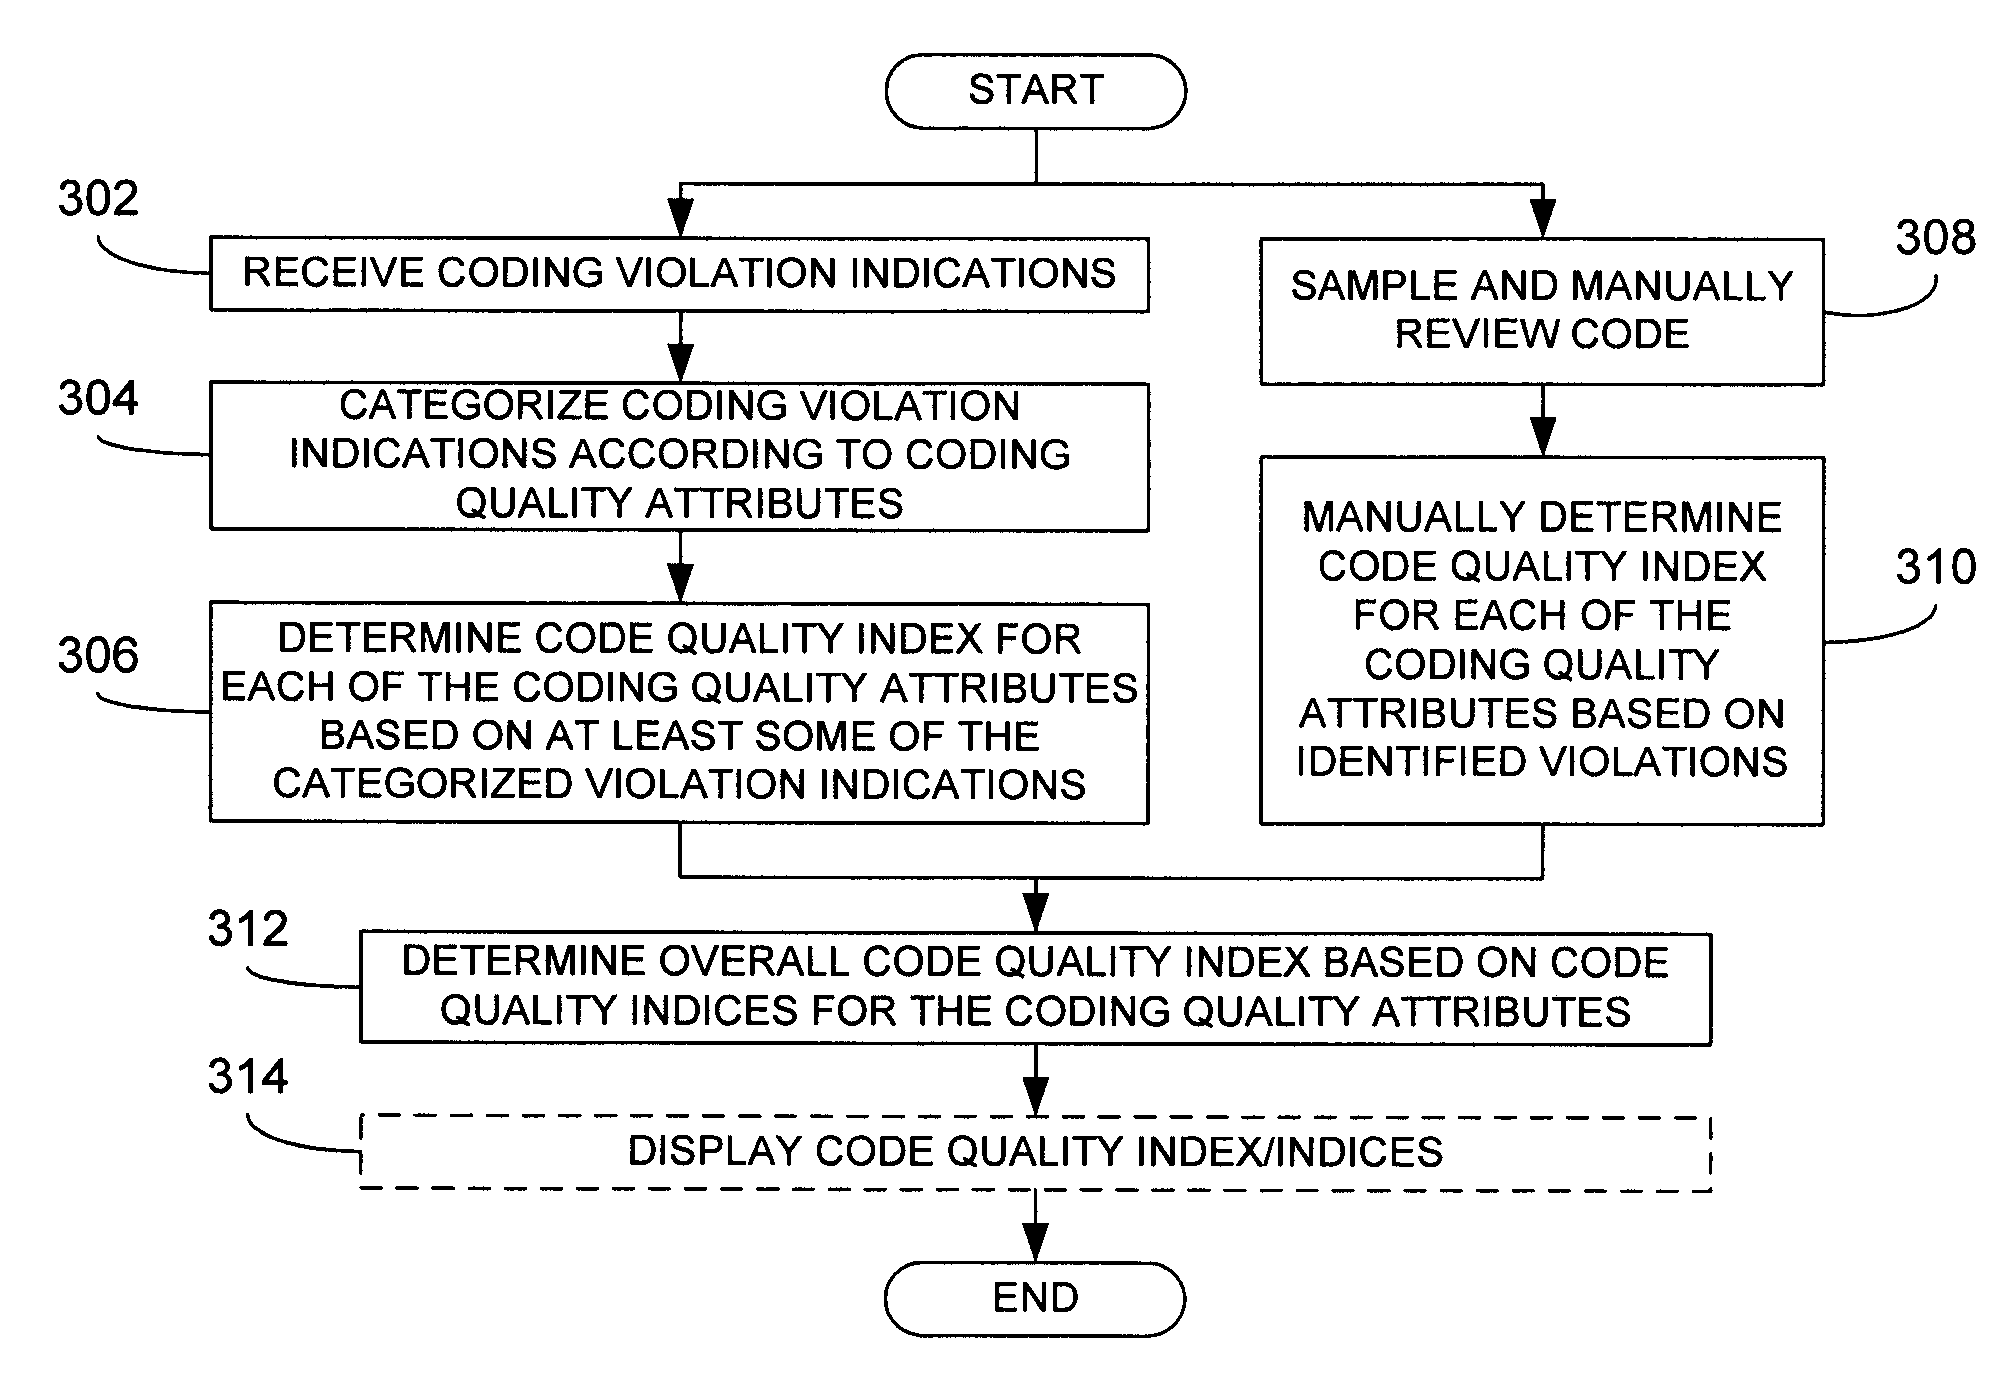 Assessment of software code quality based on coding violation indications